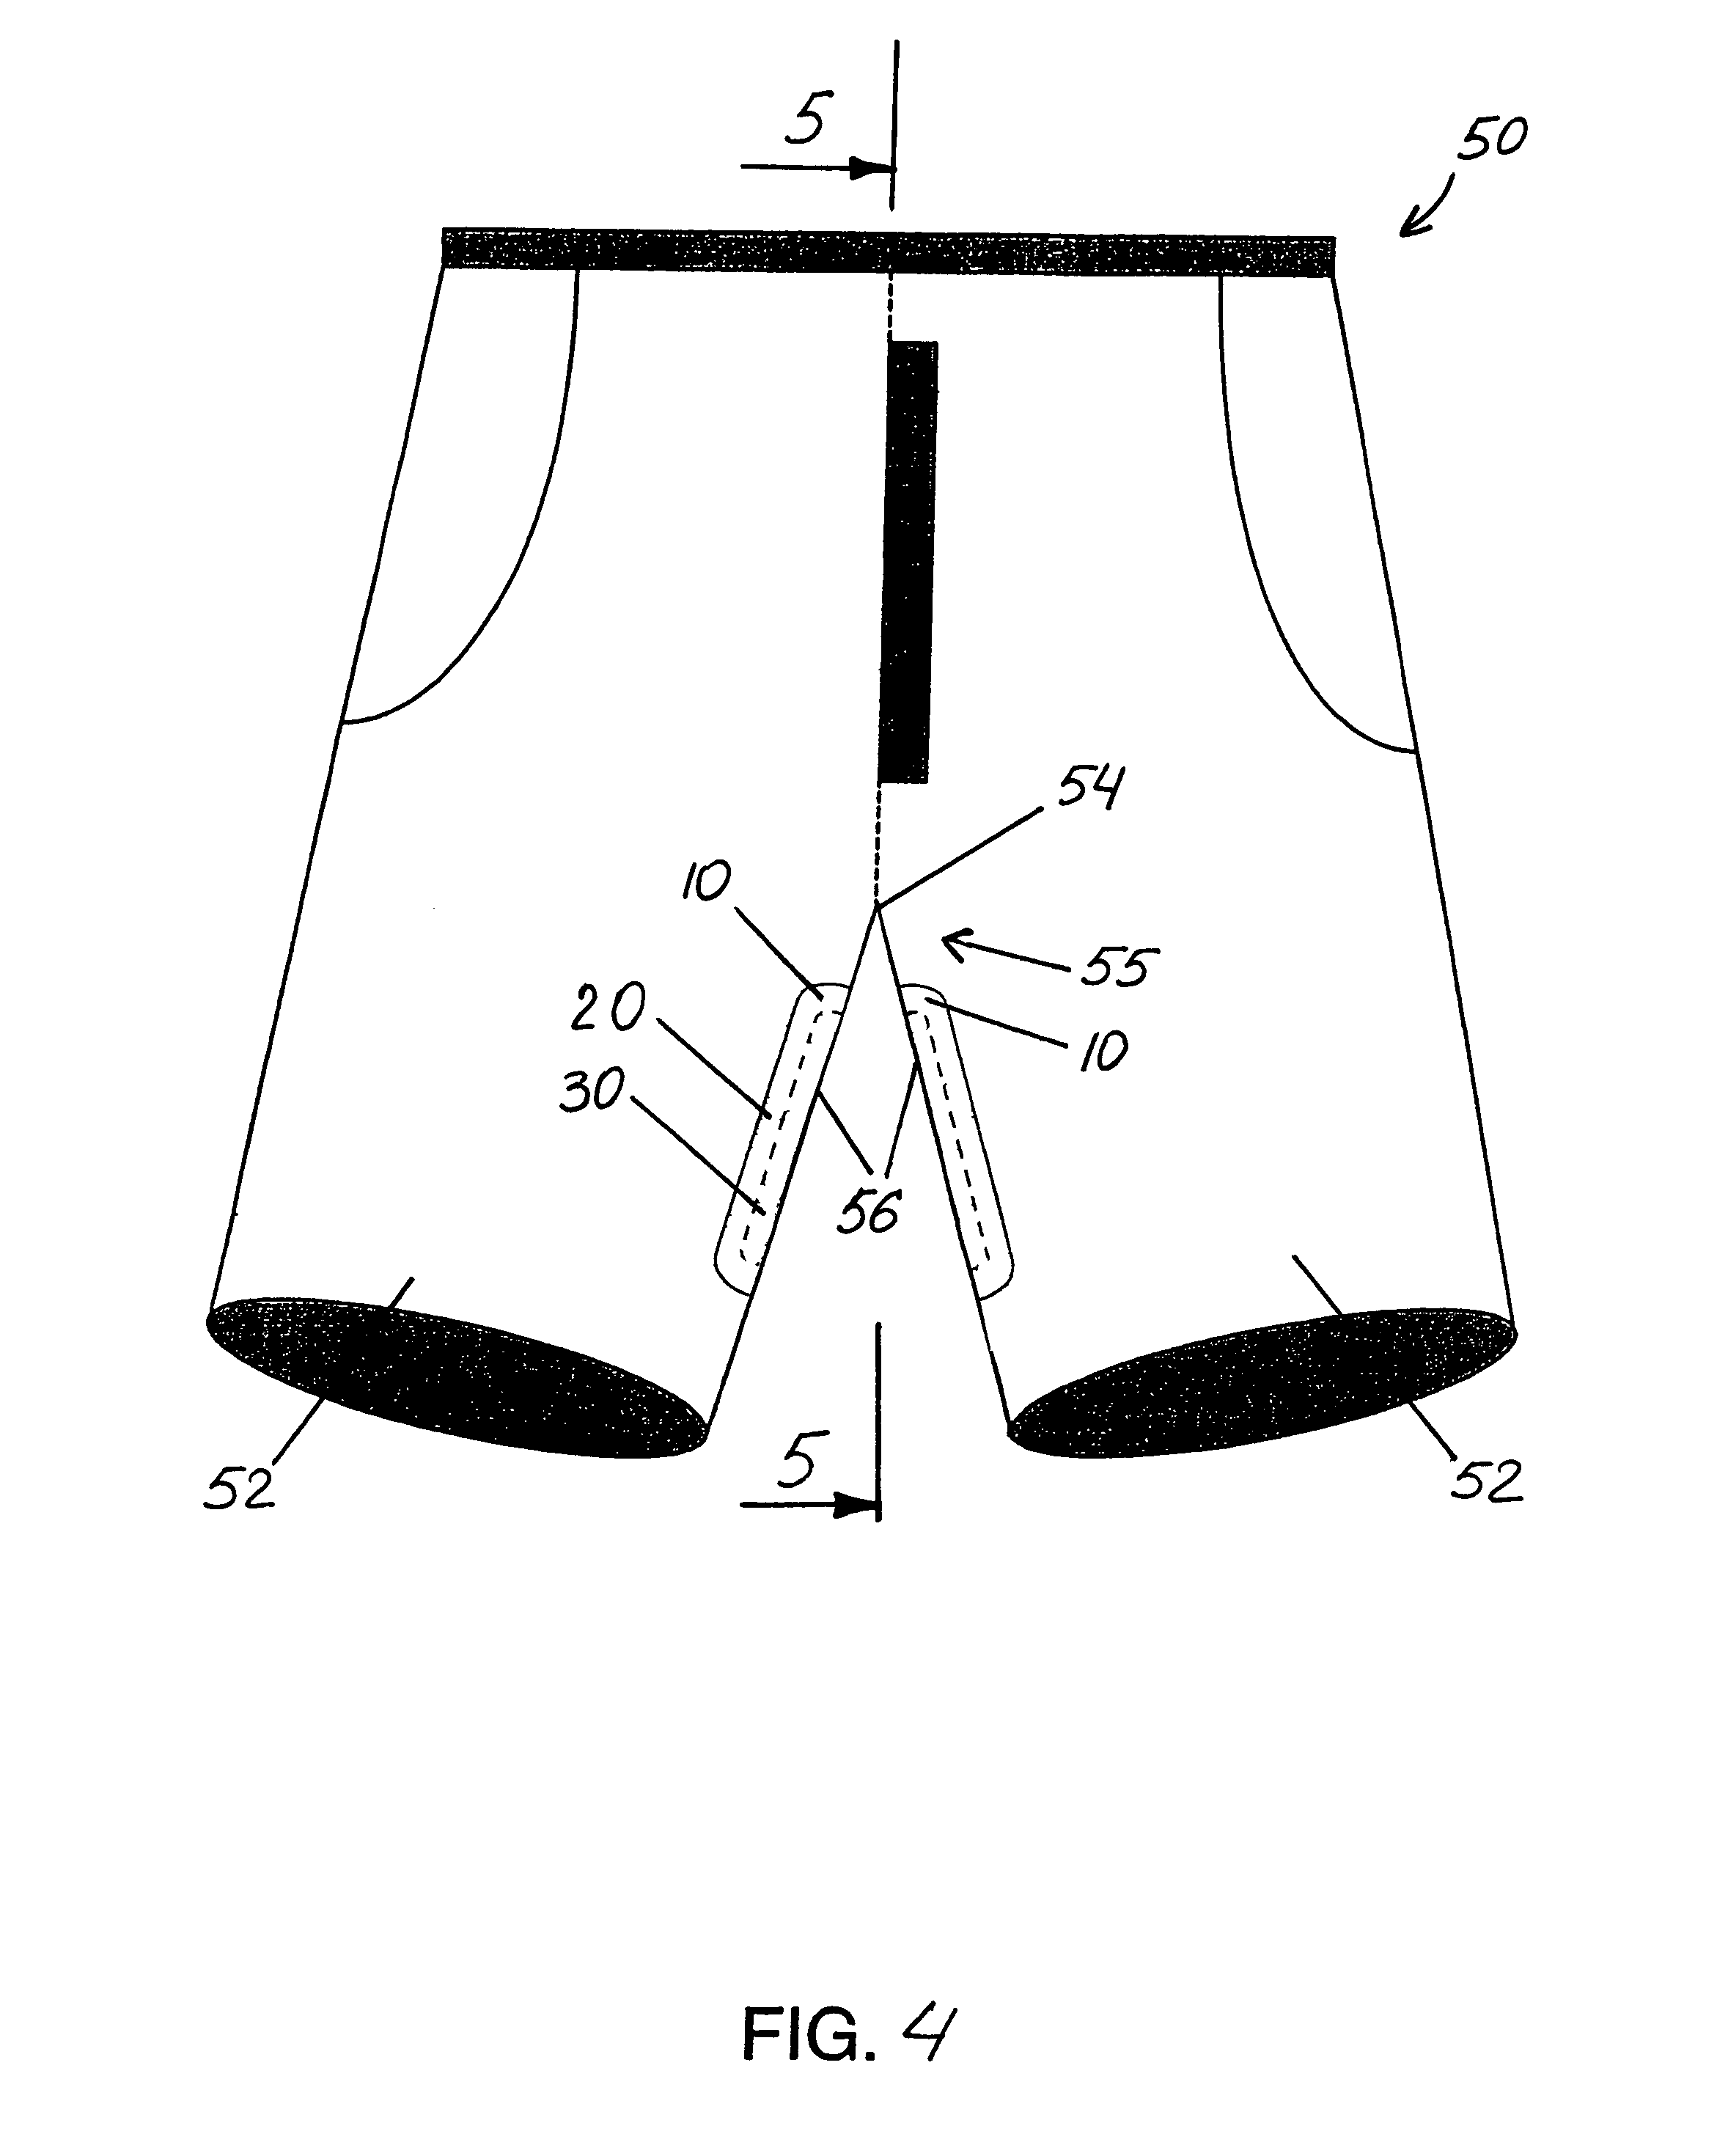 Assembled anti-creep waist-clothing stay device and method of reinforcing crotch-adjacent inner-seam areas